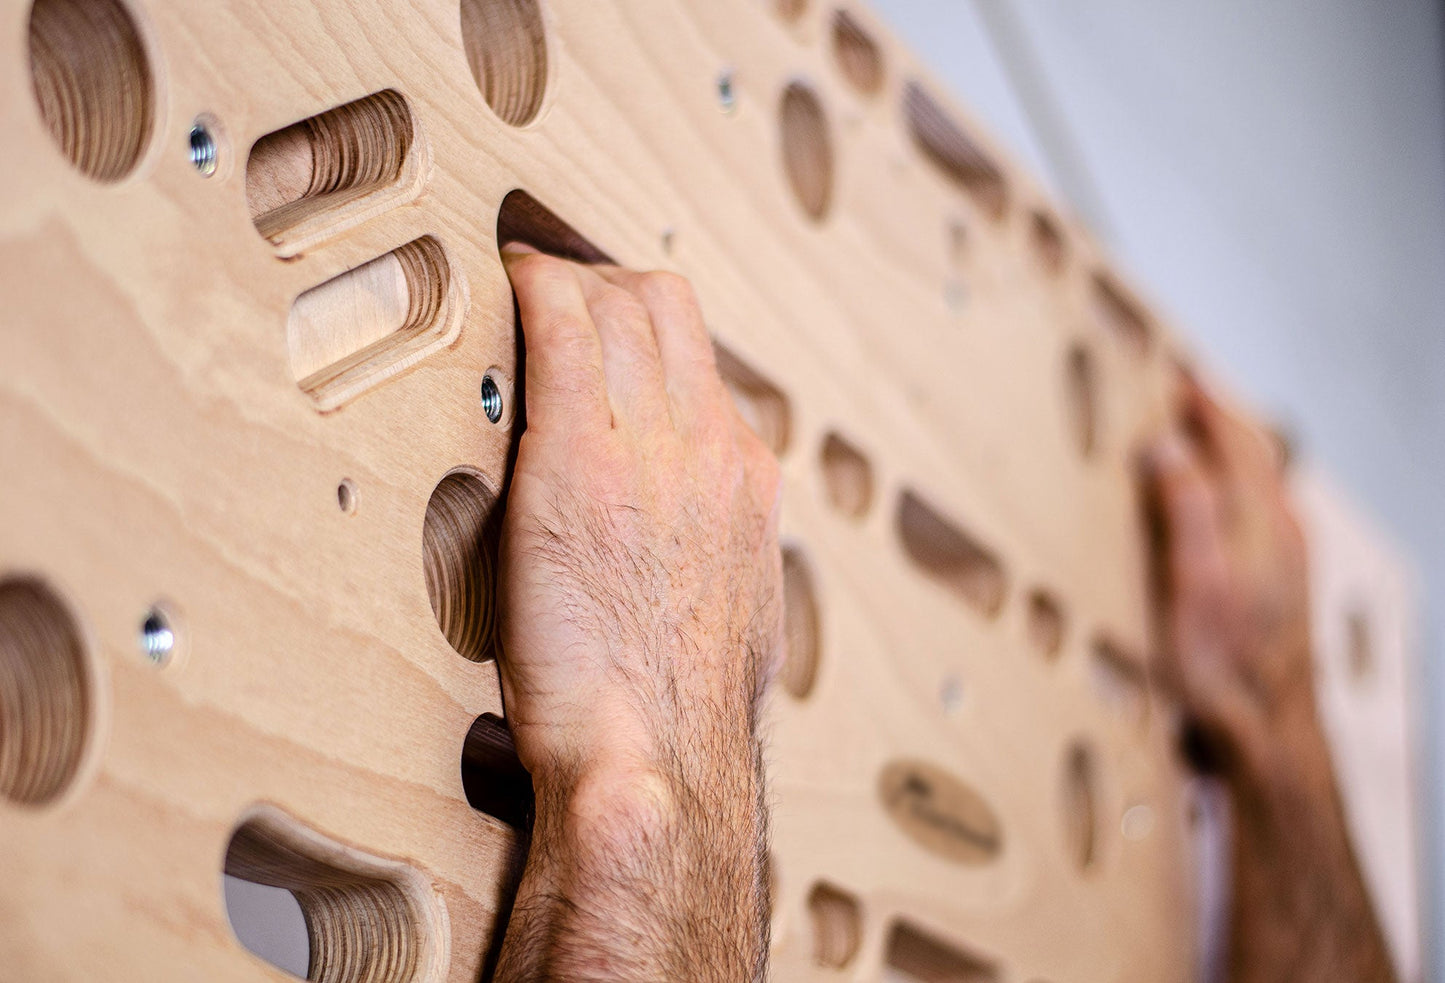 Kraxlboard The Wall for mounting on the wall - The multifunctional training wall